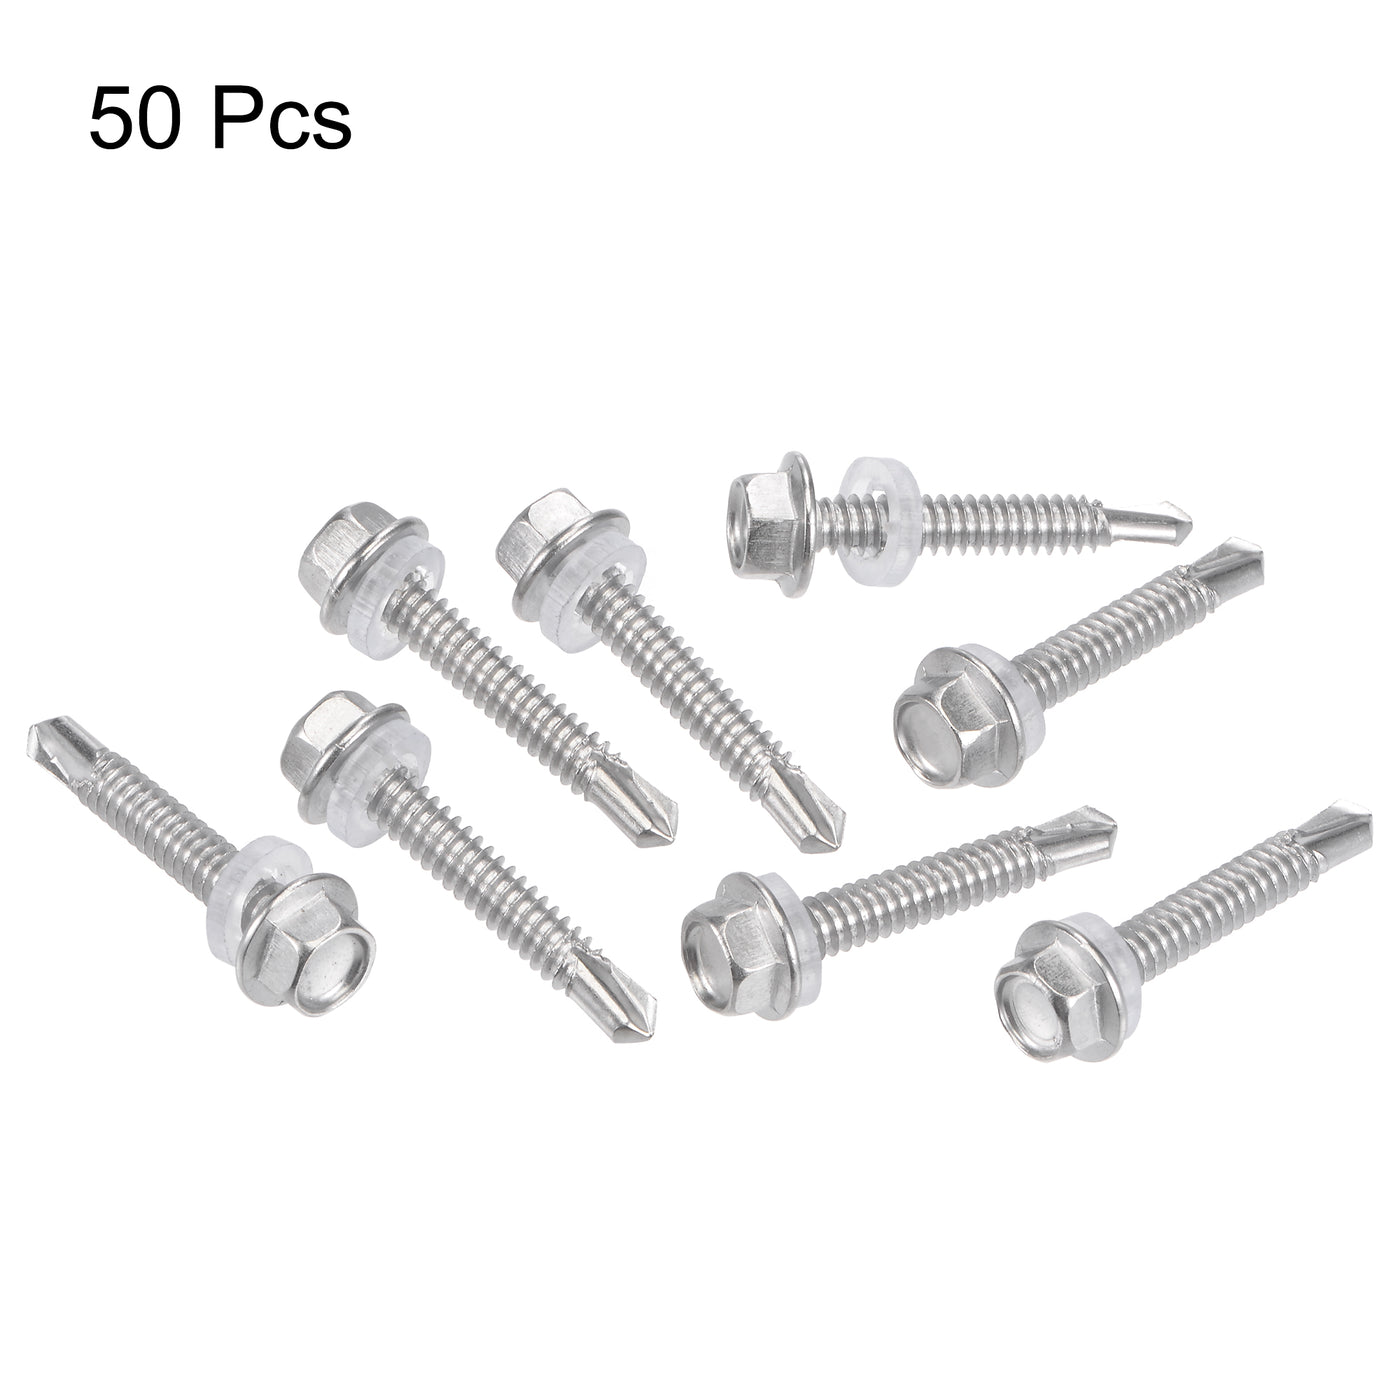 uxcell Uxcell #12 x 1 17/64" 410 Stainless Steel Hex Washer Head Self Drilling Screws 50pcs